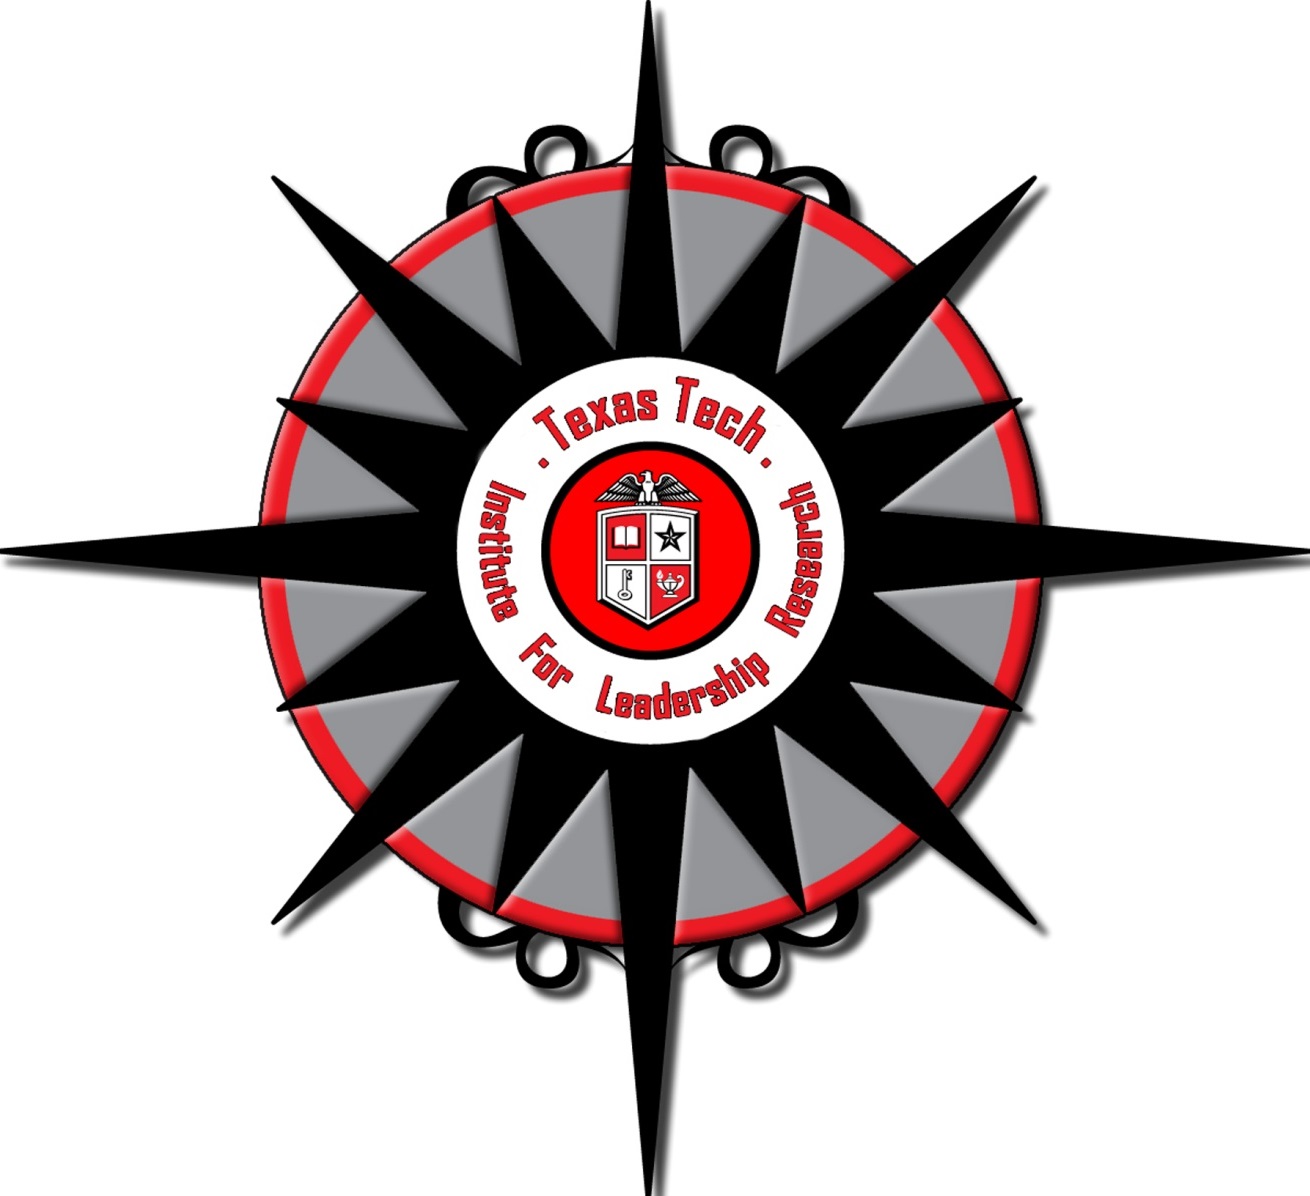 Logo for Texas Tech Institute for Leadership Research